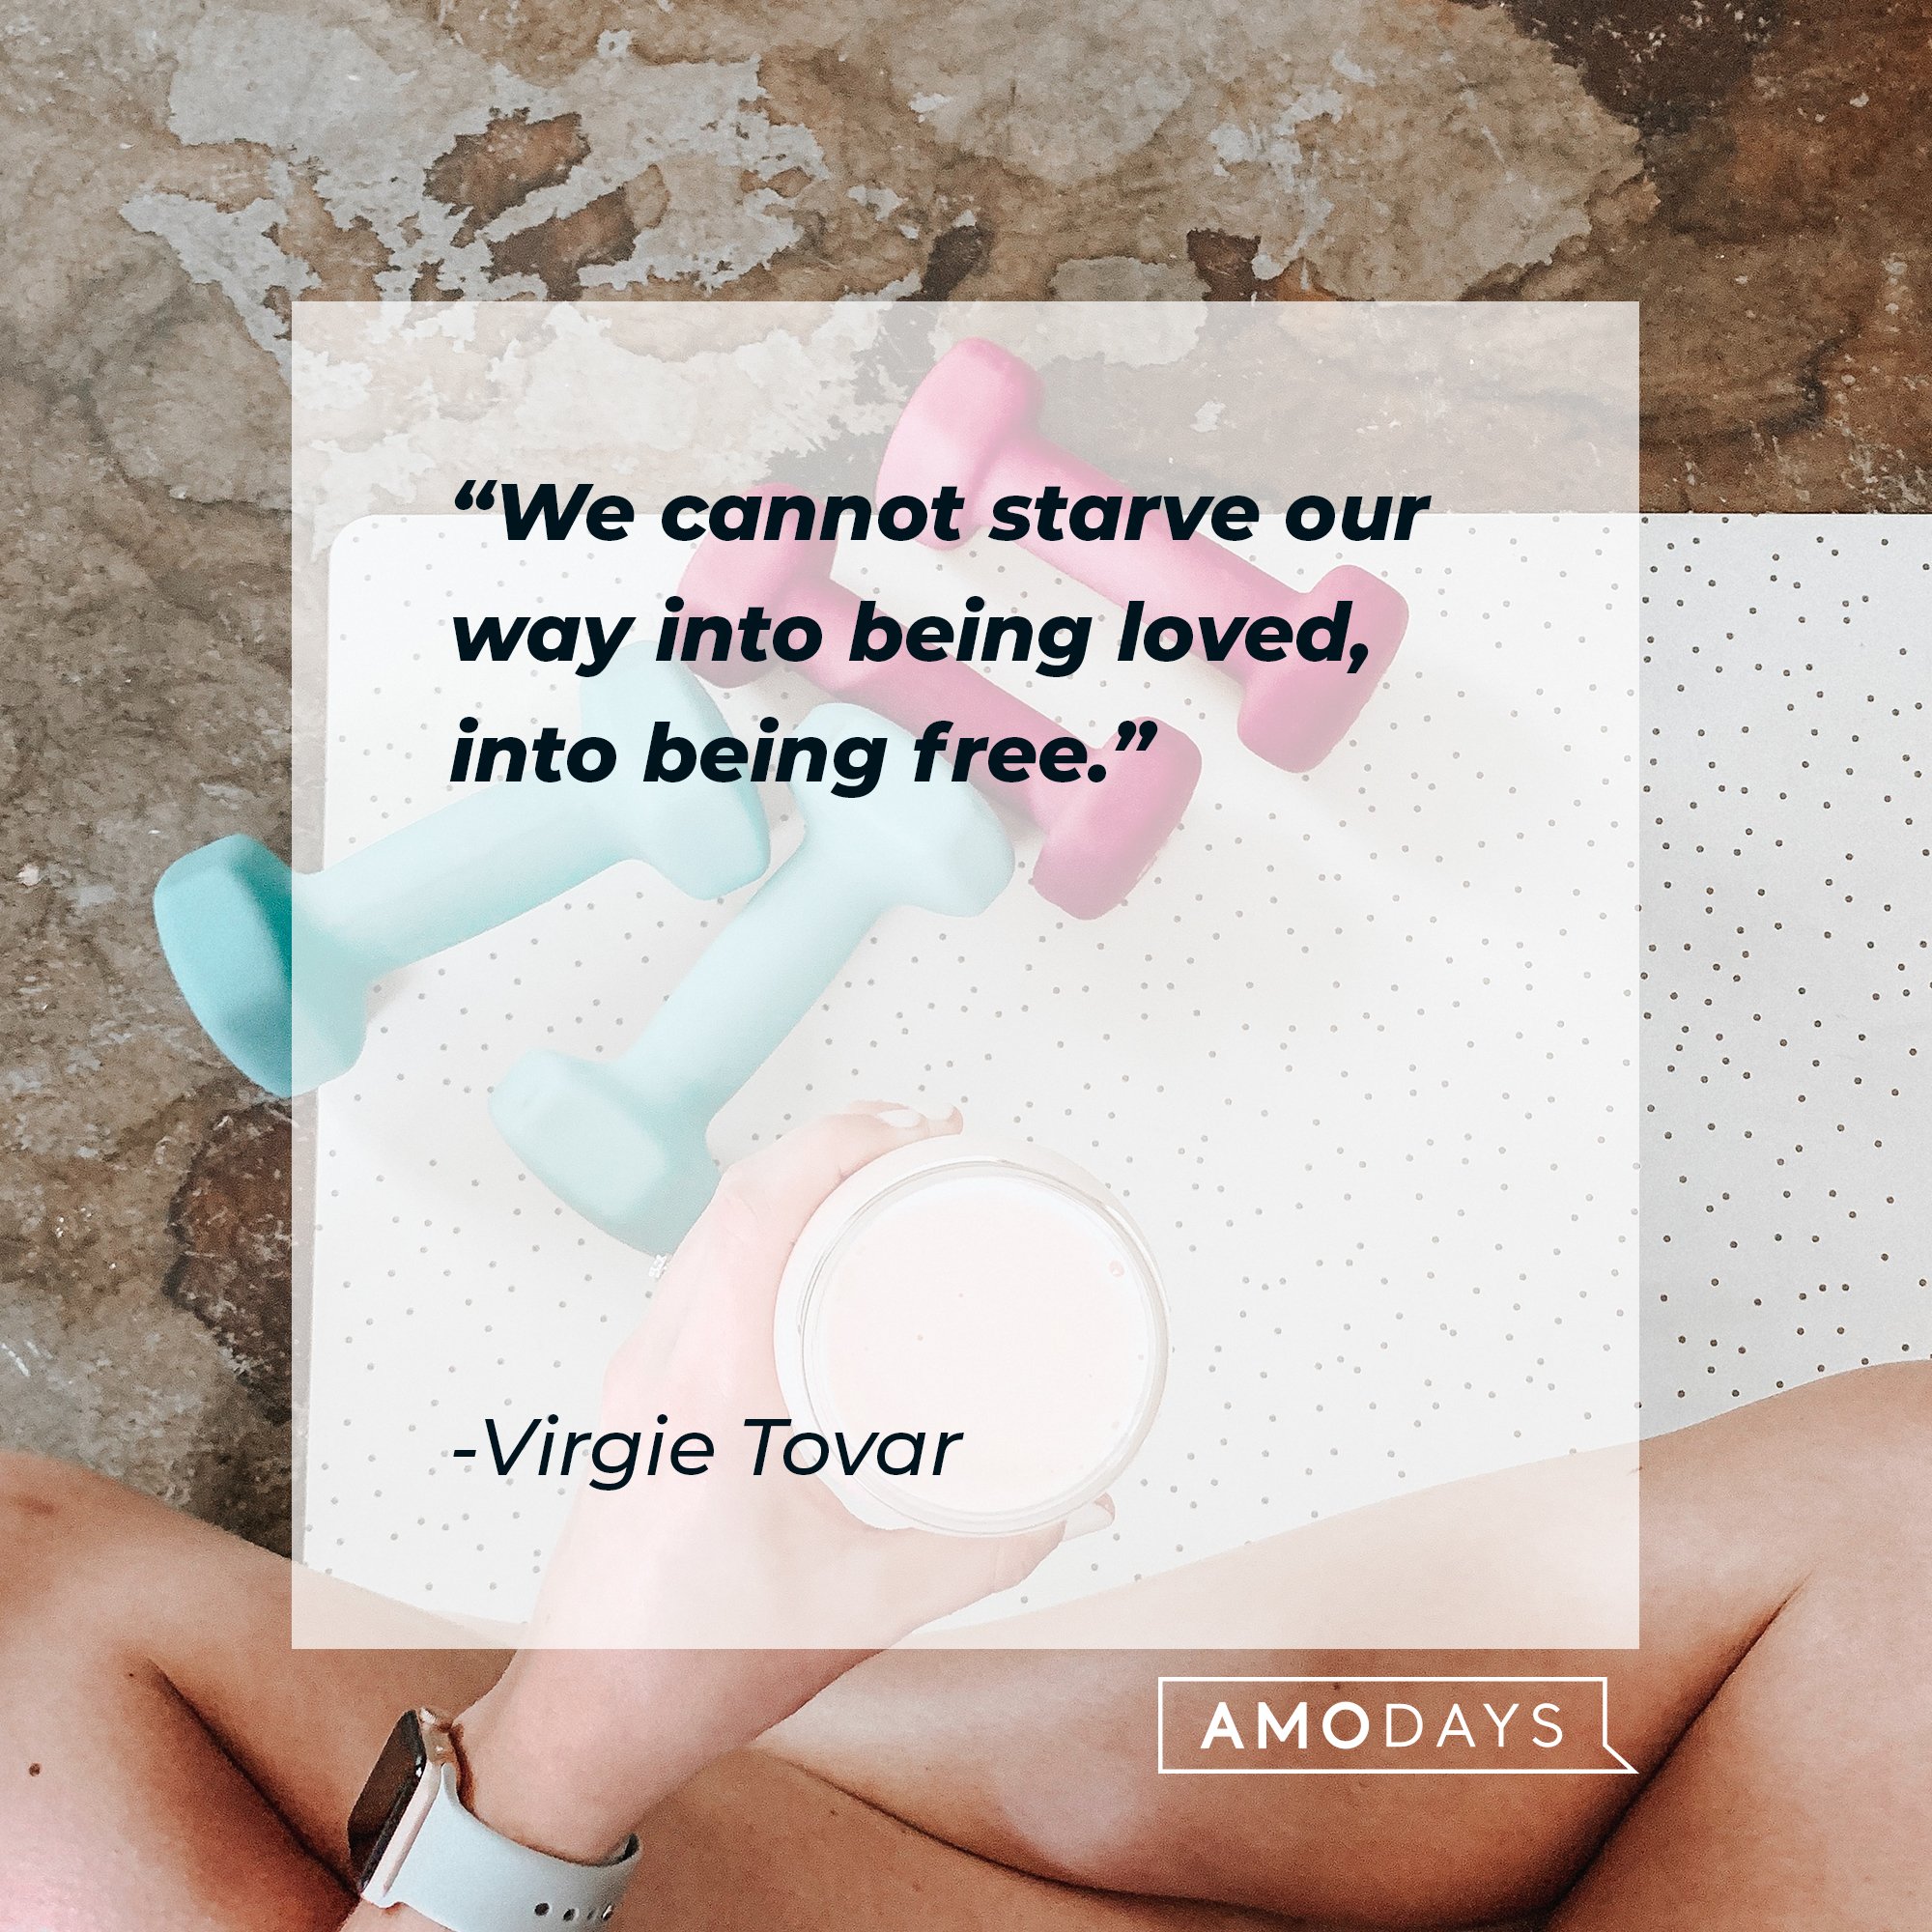 Virgie Tovar’s quote: "We cannot starve our way into being loved, into being free." | Image: AmoDays